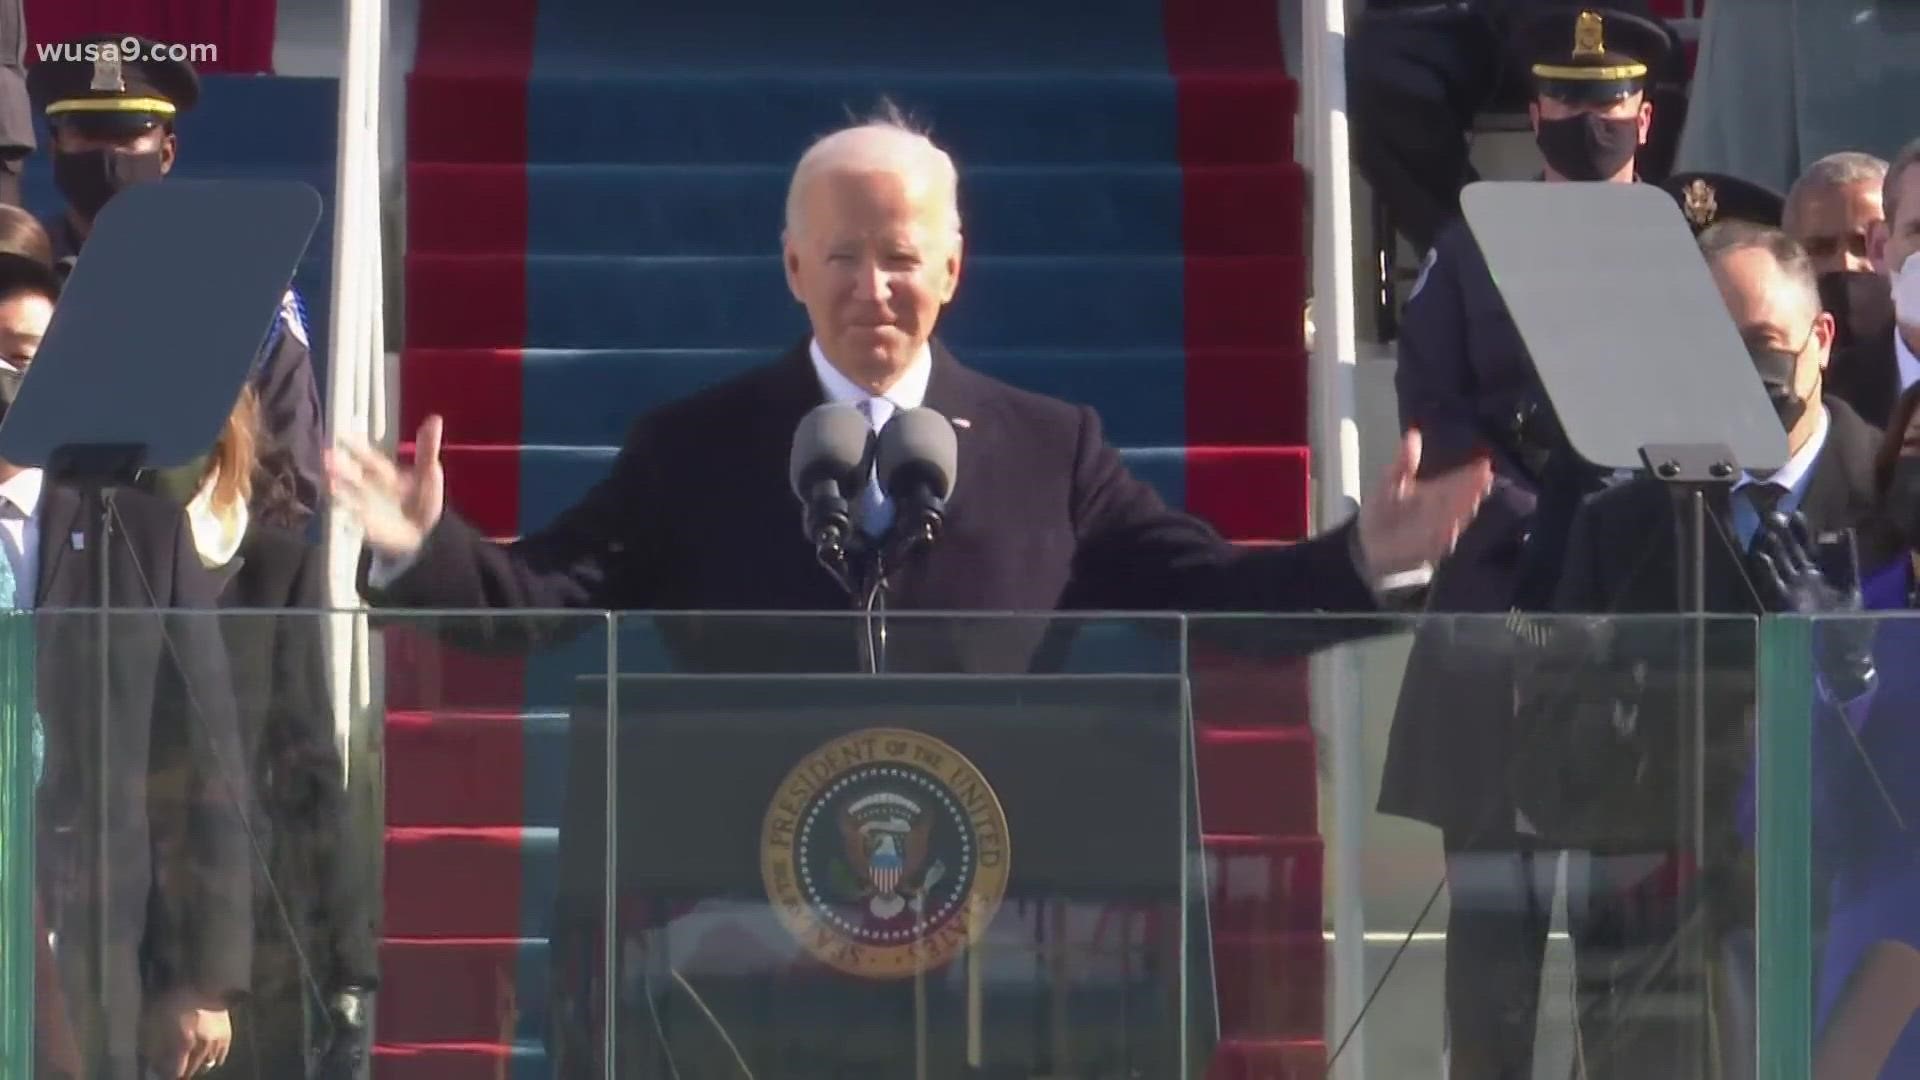 Joe Biden delivers his first speech as the 46th President of the United States moments after he was sworn in by the Chief Justice of the U.S.